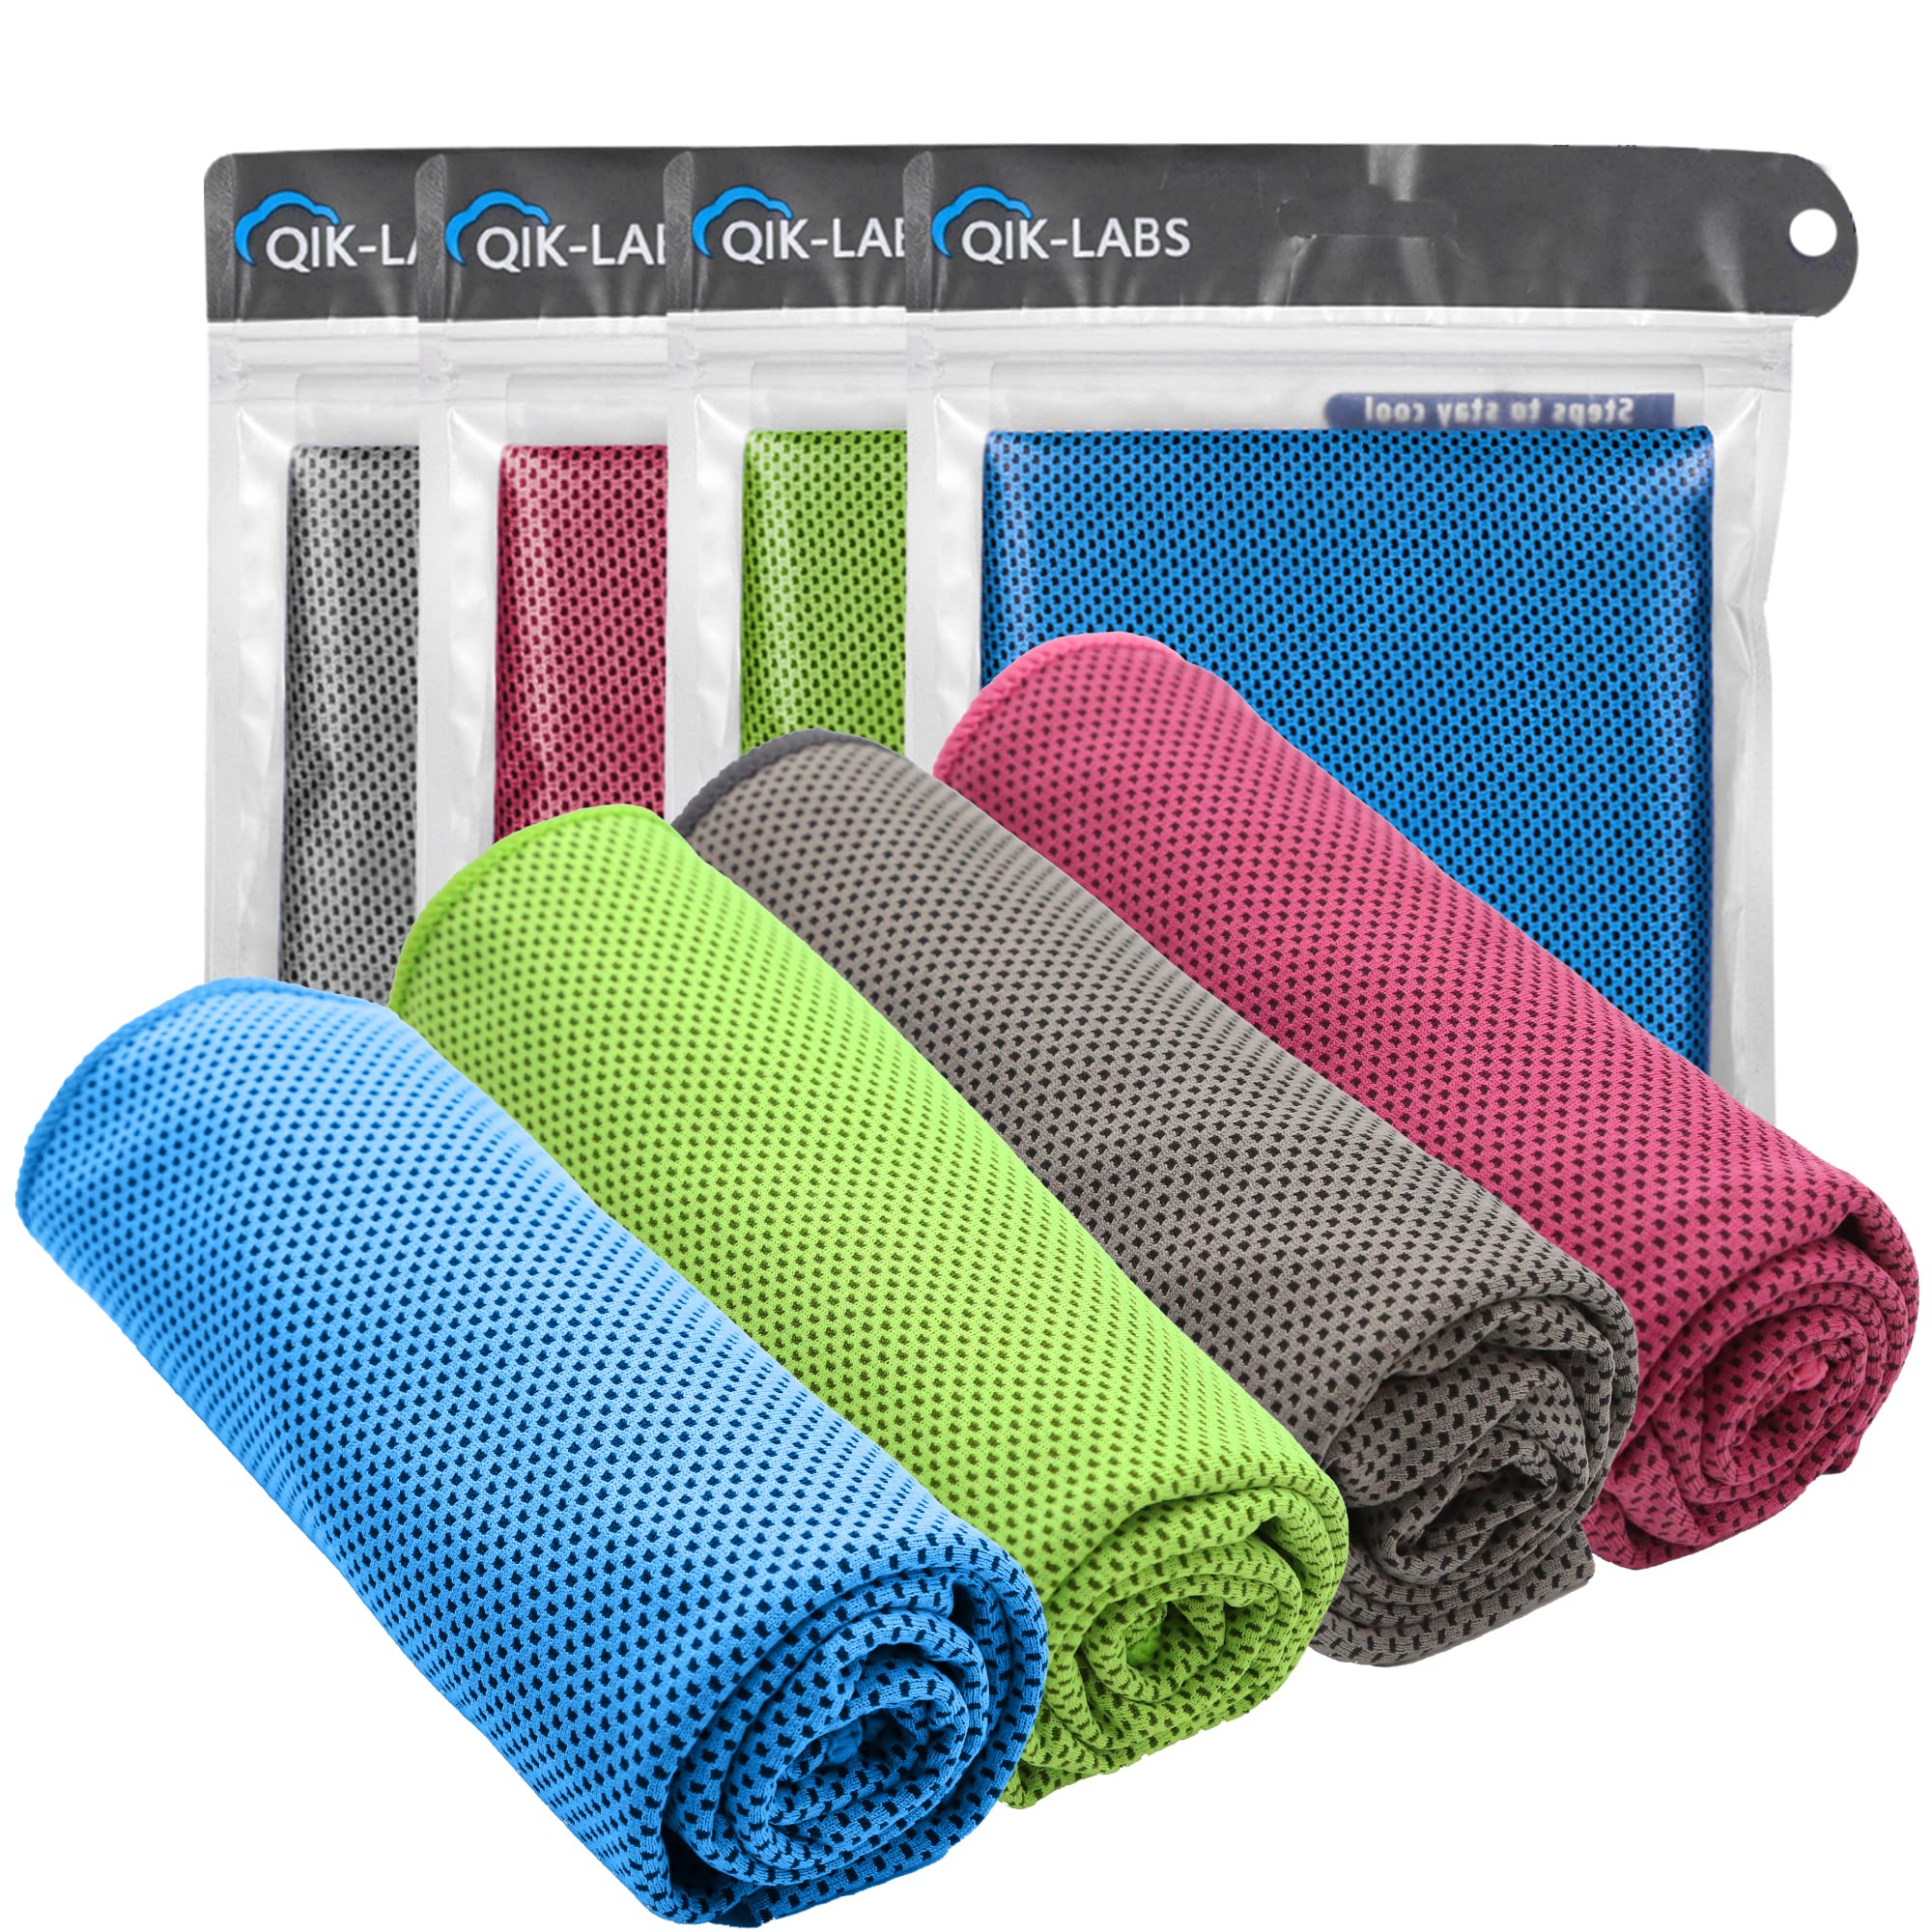 10 Best Cooling Towels for Hot-Weather Training